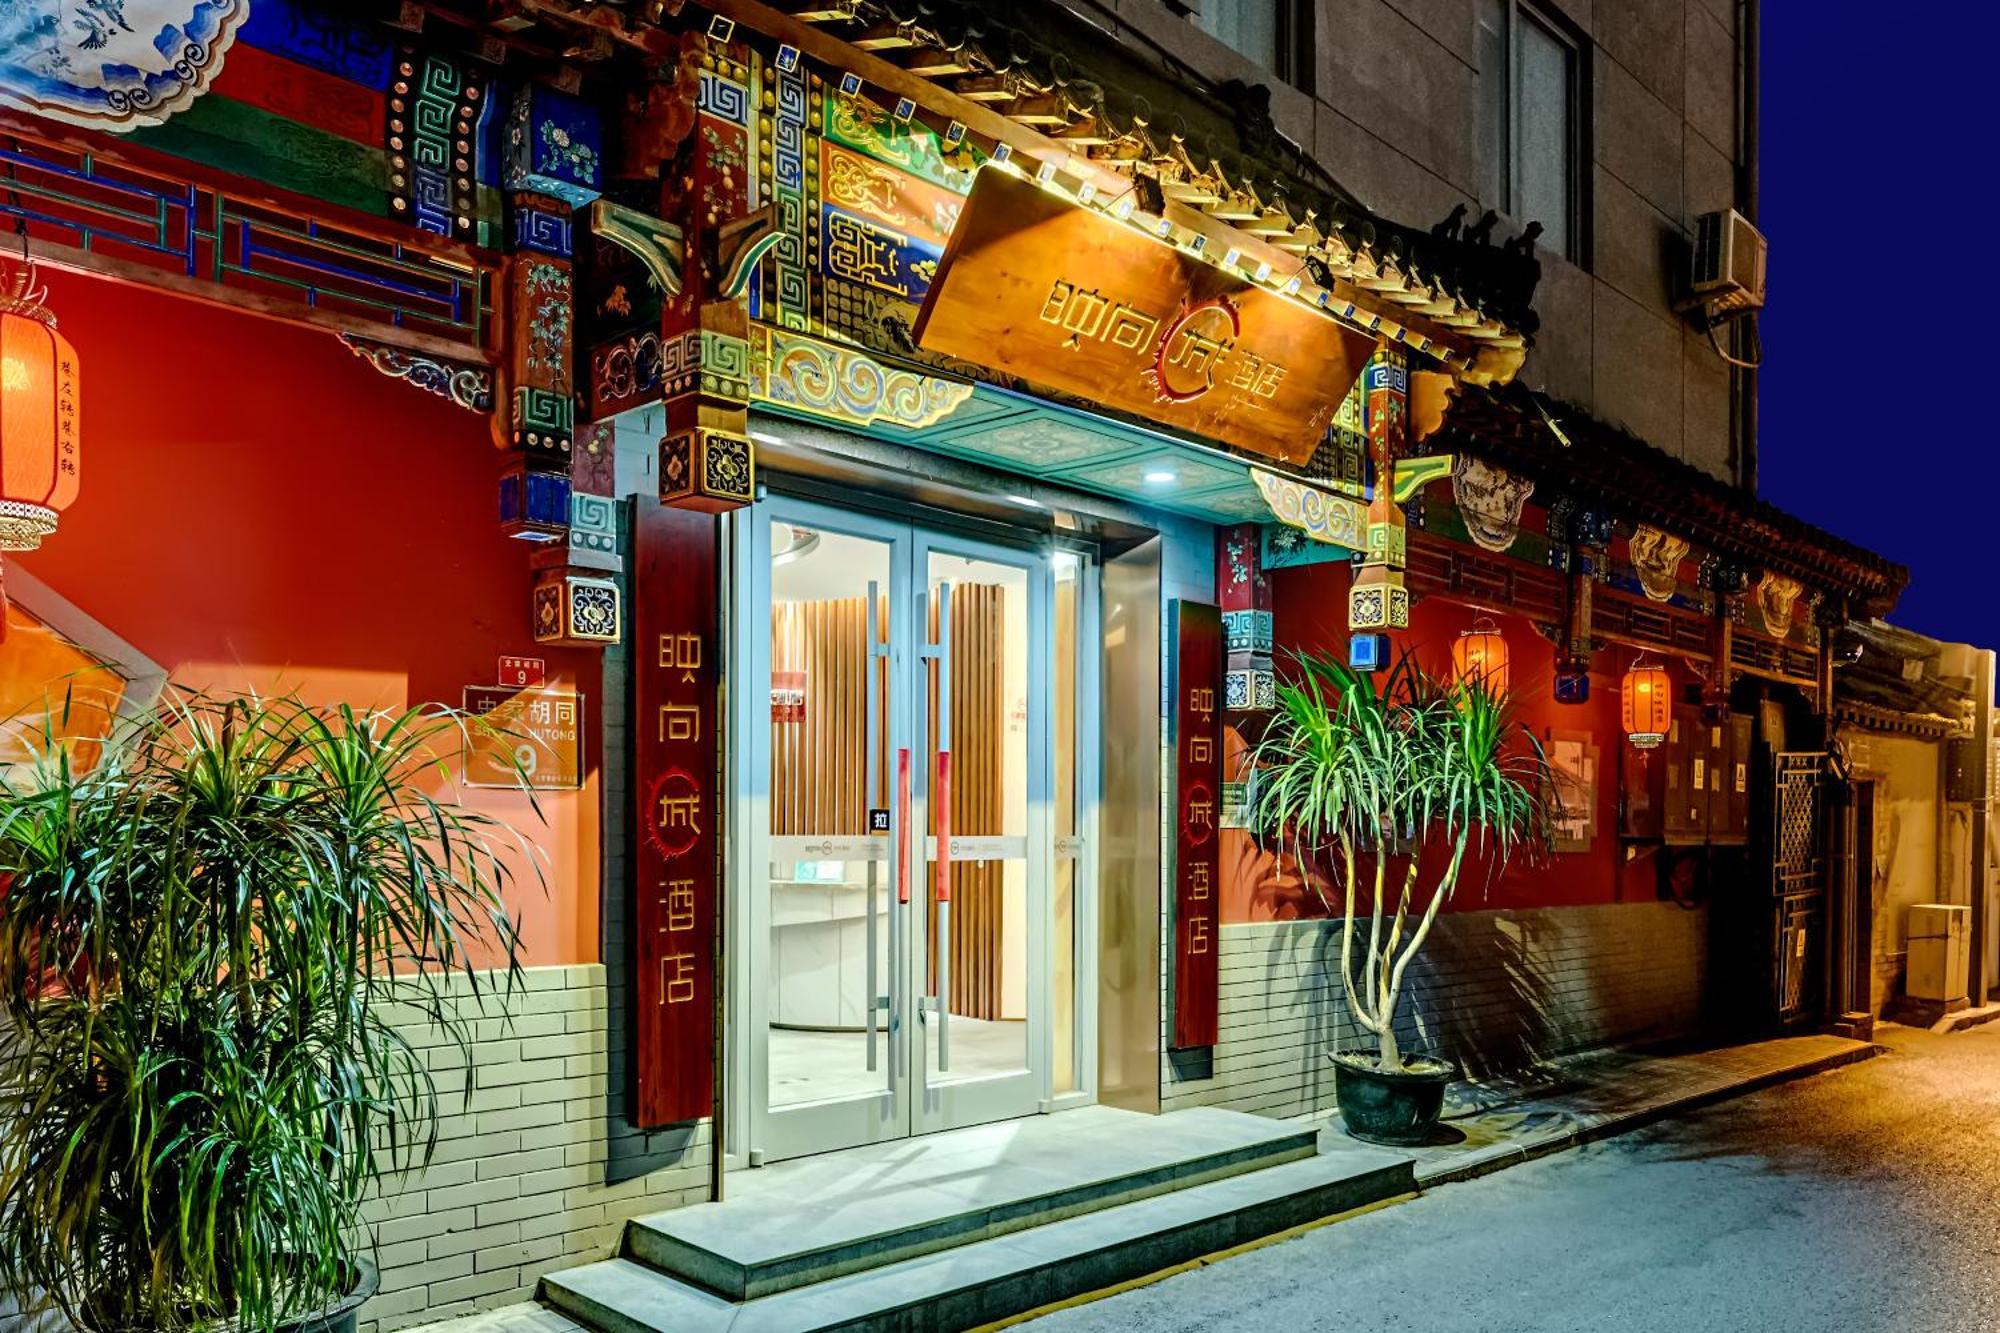 Happy Dragon City Culture Hotel -In The City Center With Ticket Service&Food Recommendation,Near Tian'Anmen Forbidden City,Wangfujing Walking Street,Easy To Get Any Tour Sights In ปักกิ่ง ภายนอก รูปภาพ